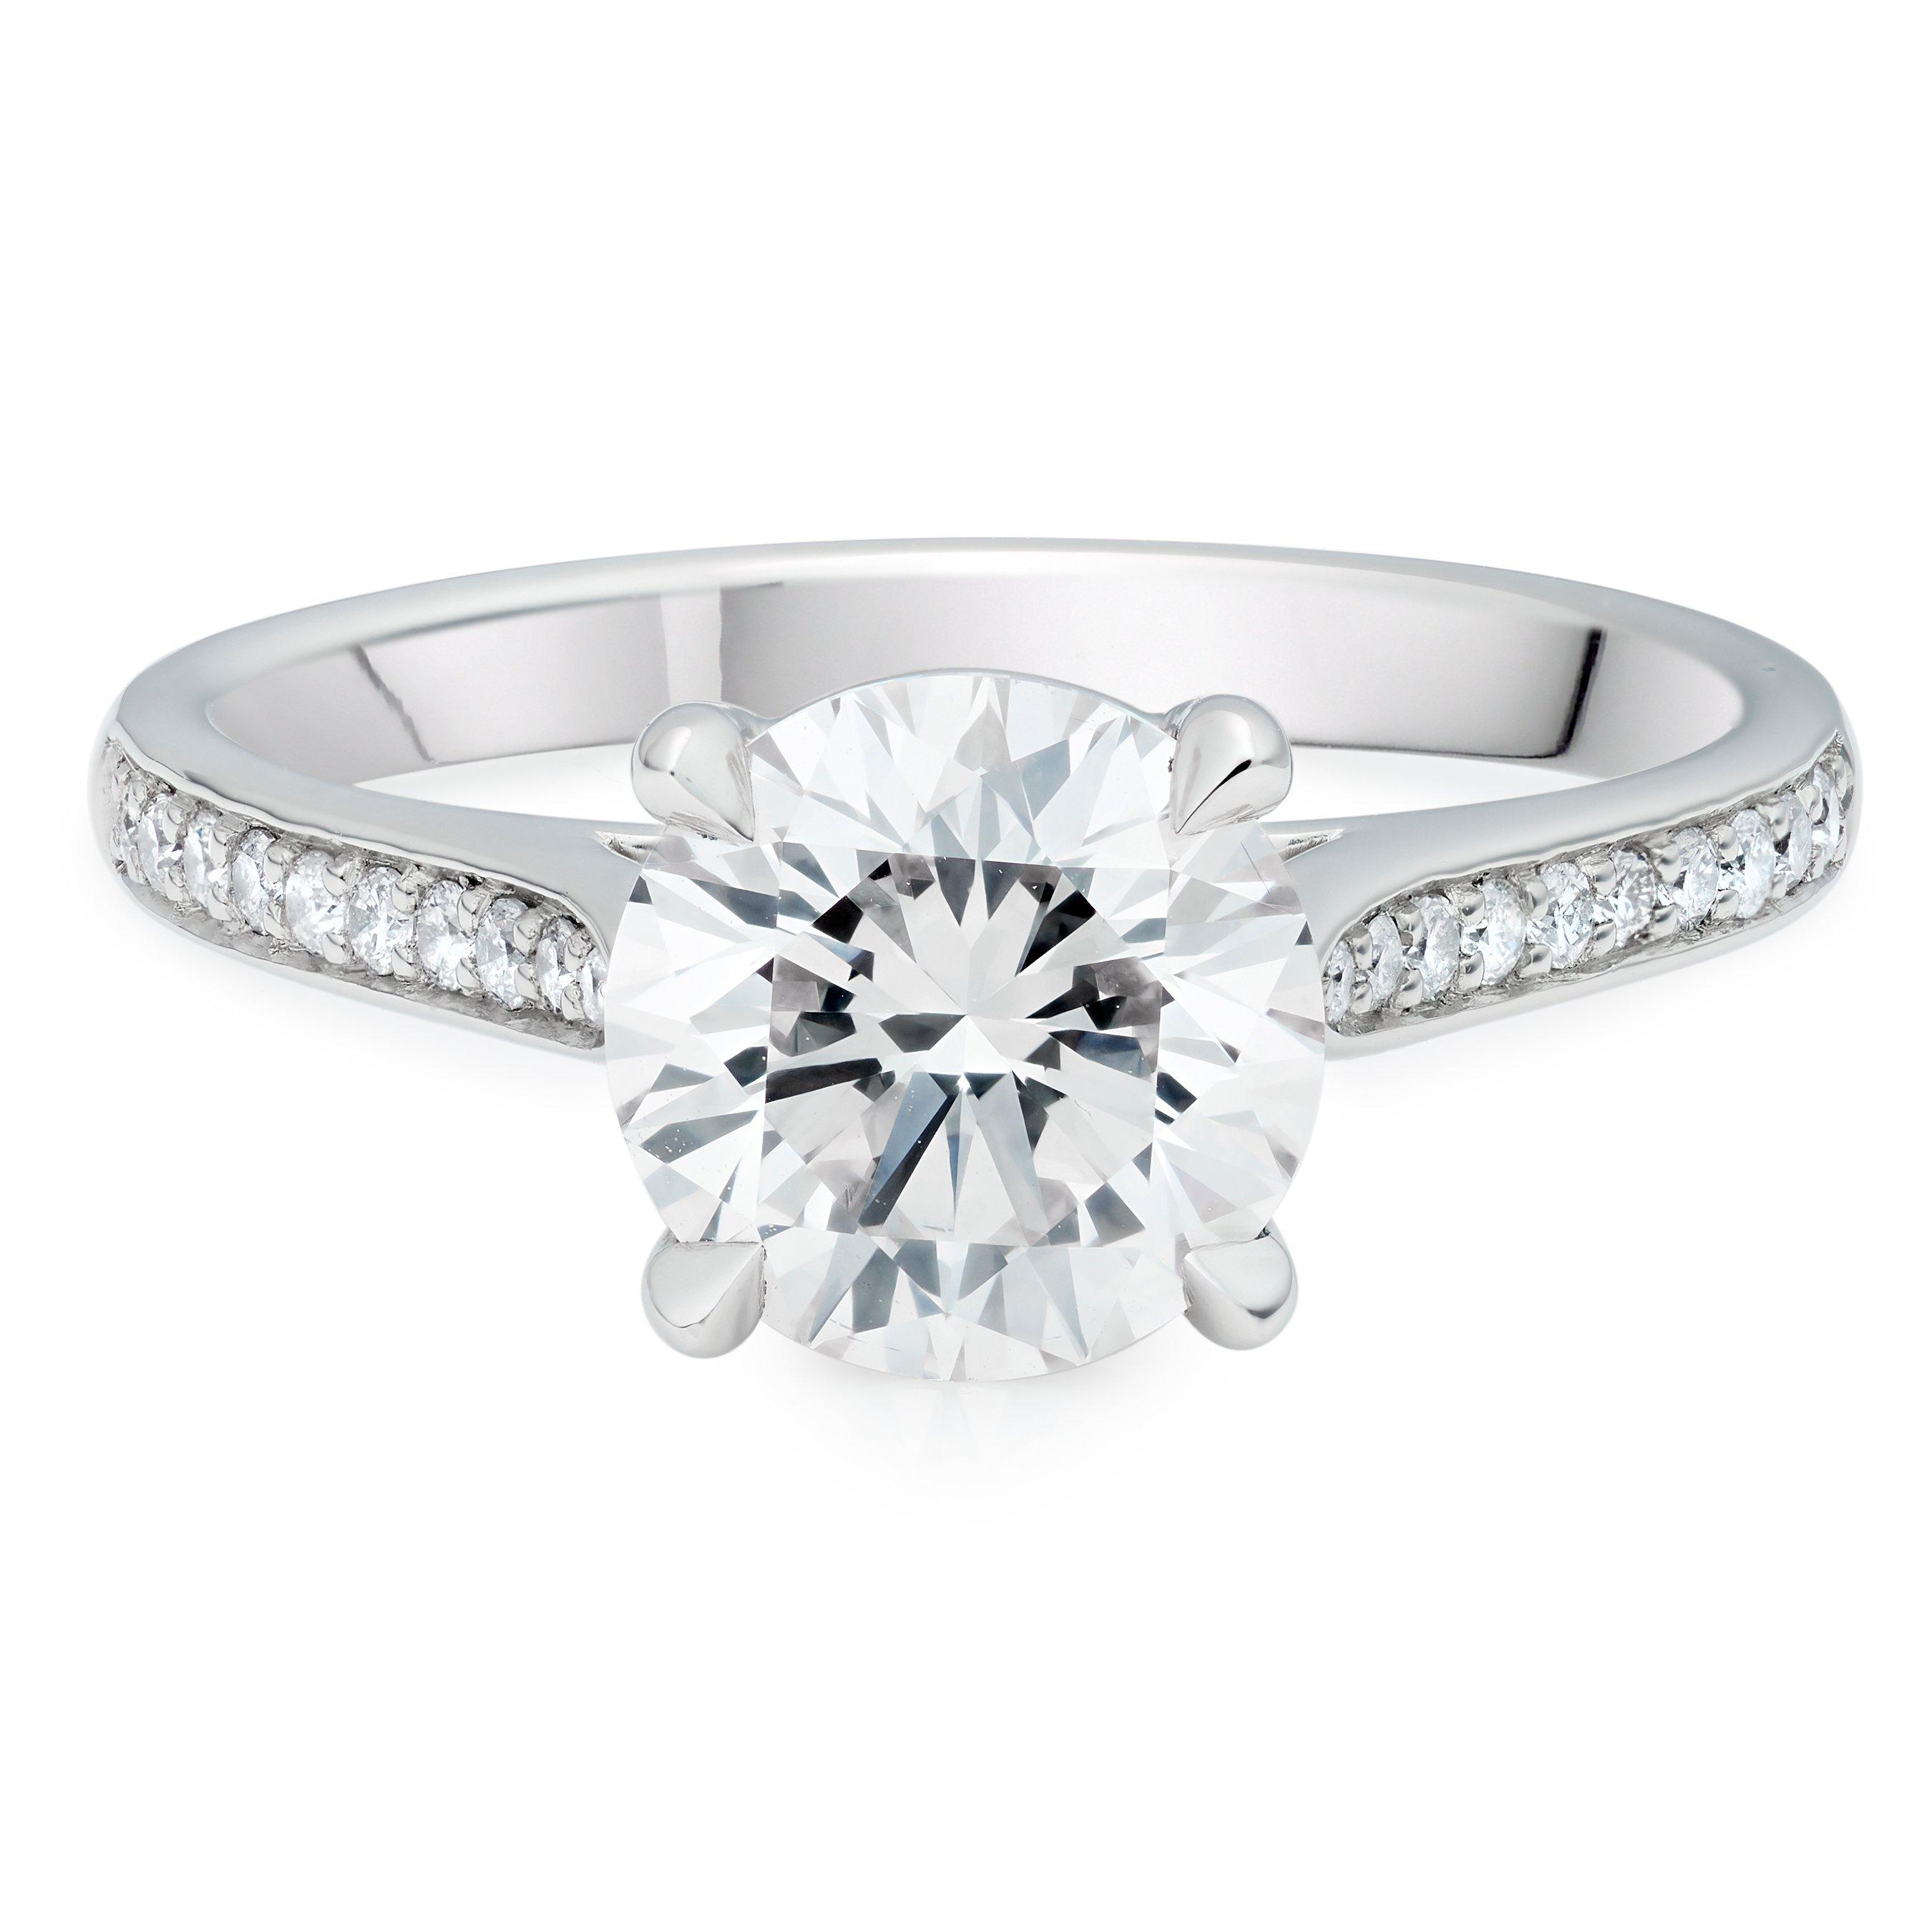 Once Platinum Diamond Solitaire Ring | 0131985 | Beaverbrooks the Jewellers